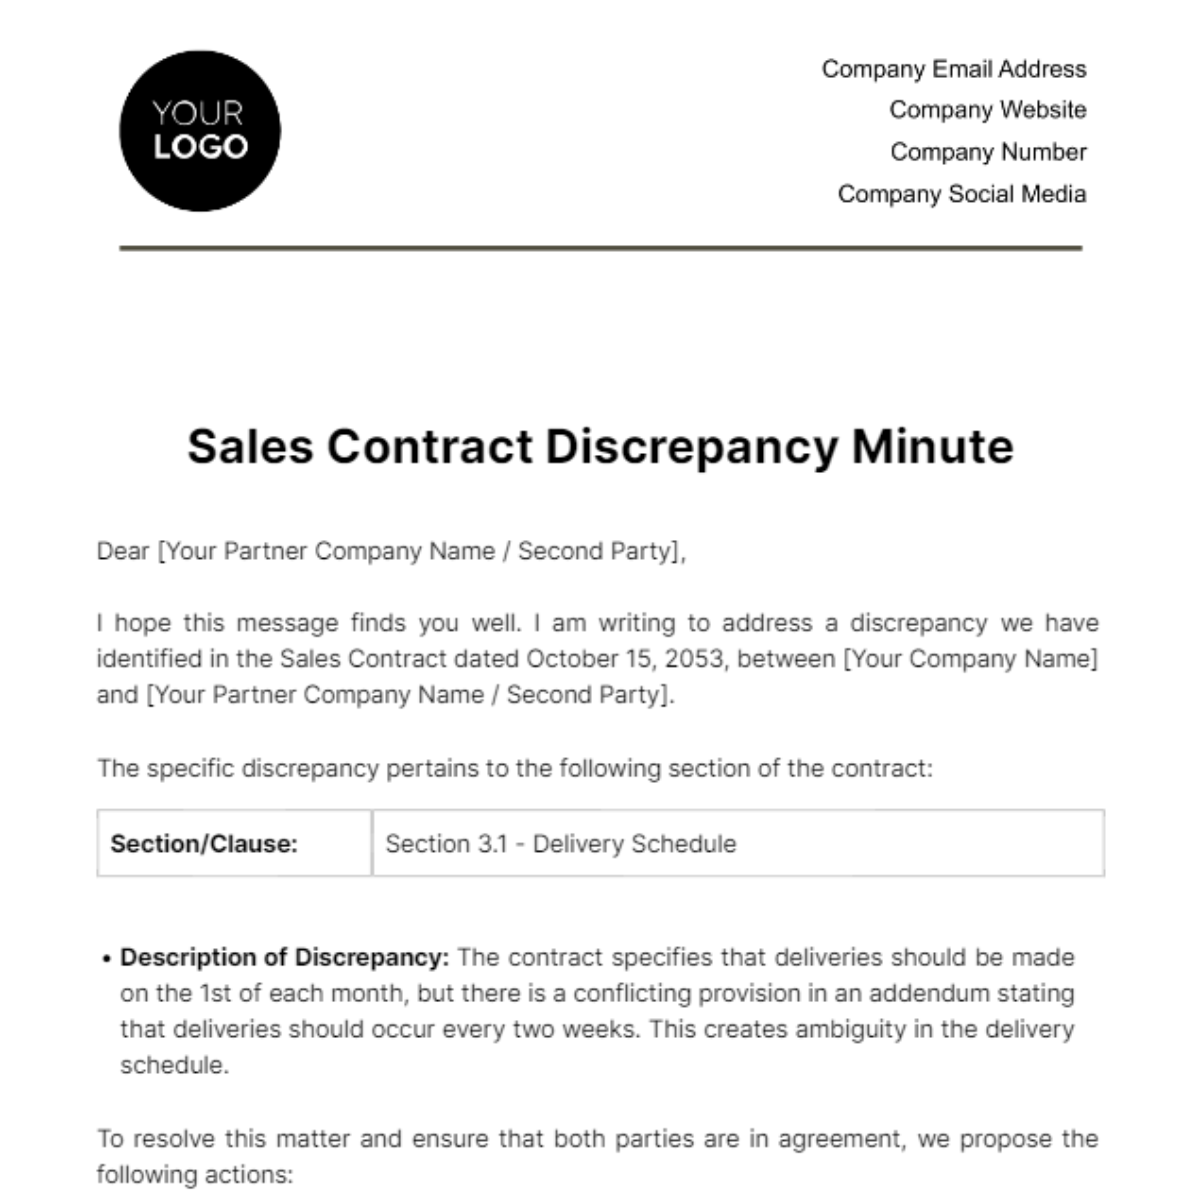 Free Sales Contract Discrepancy Minute Template